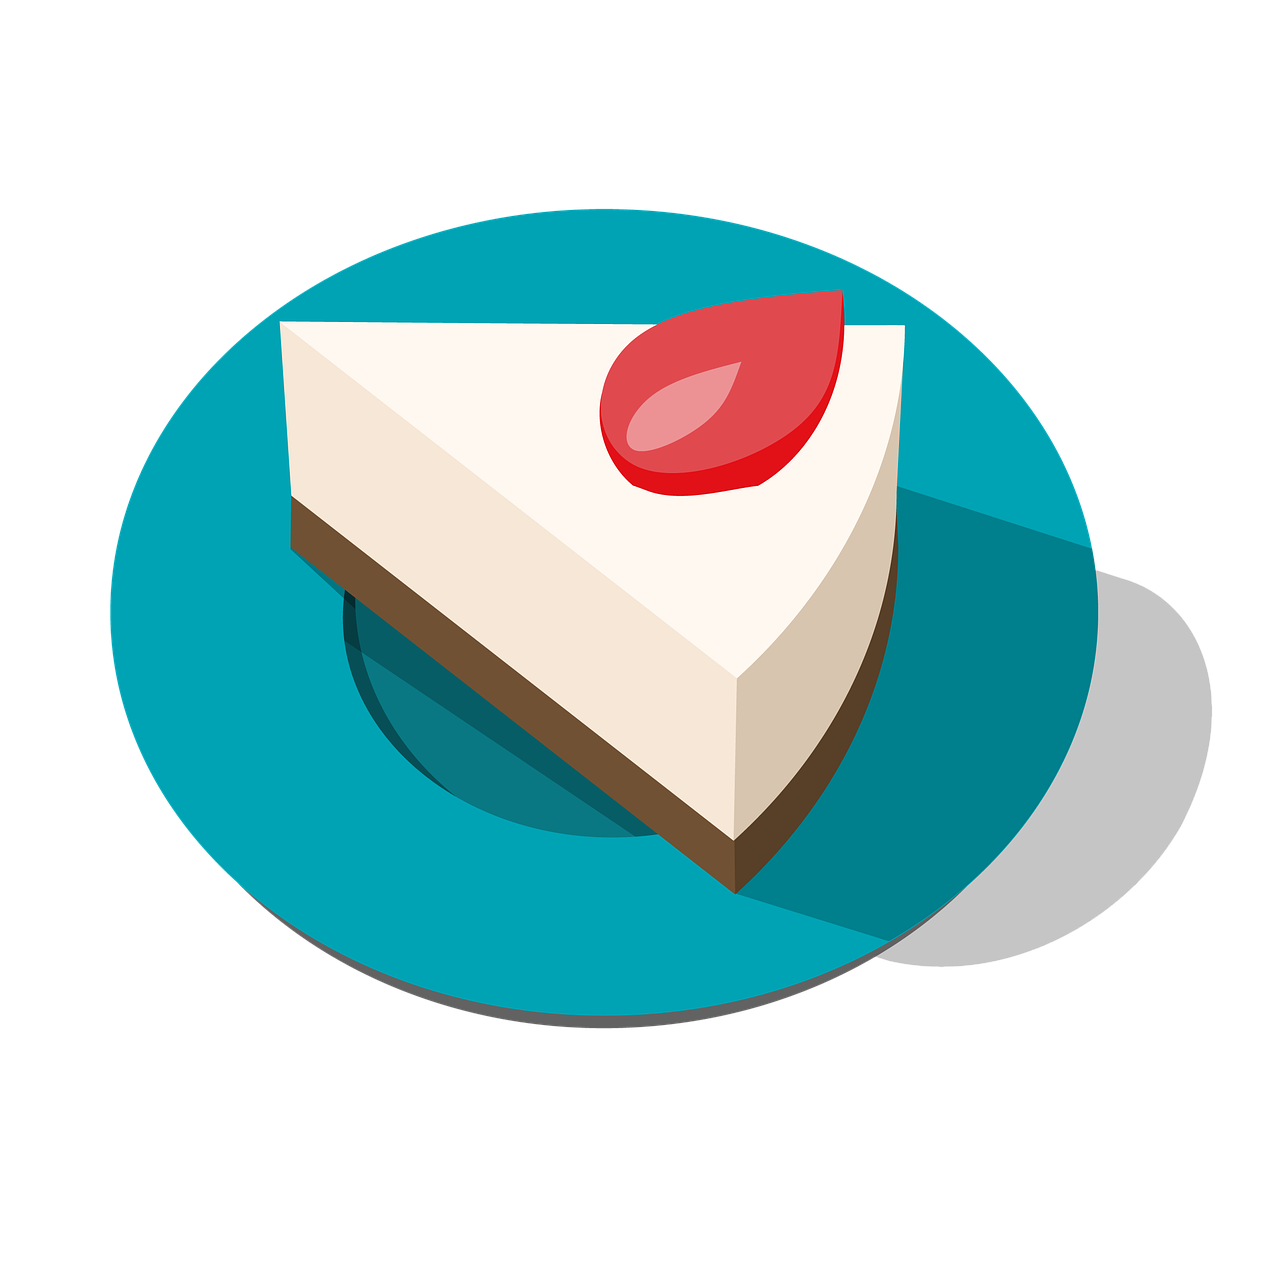 a piece of cake sitting on top of a blue plate, an illustration of, superflat, ultra wide angle isometric view, cherry, on a flat color black background, cream